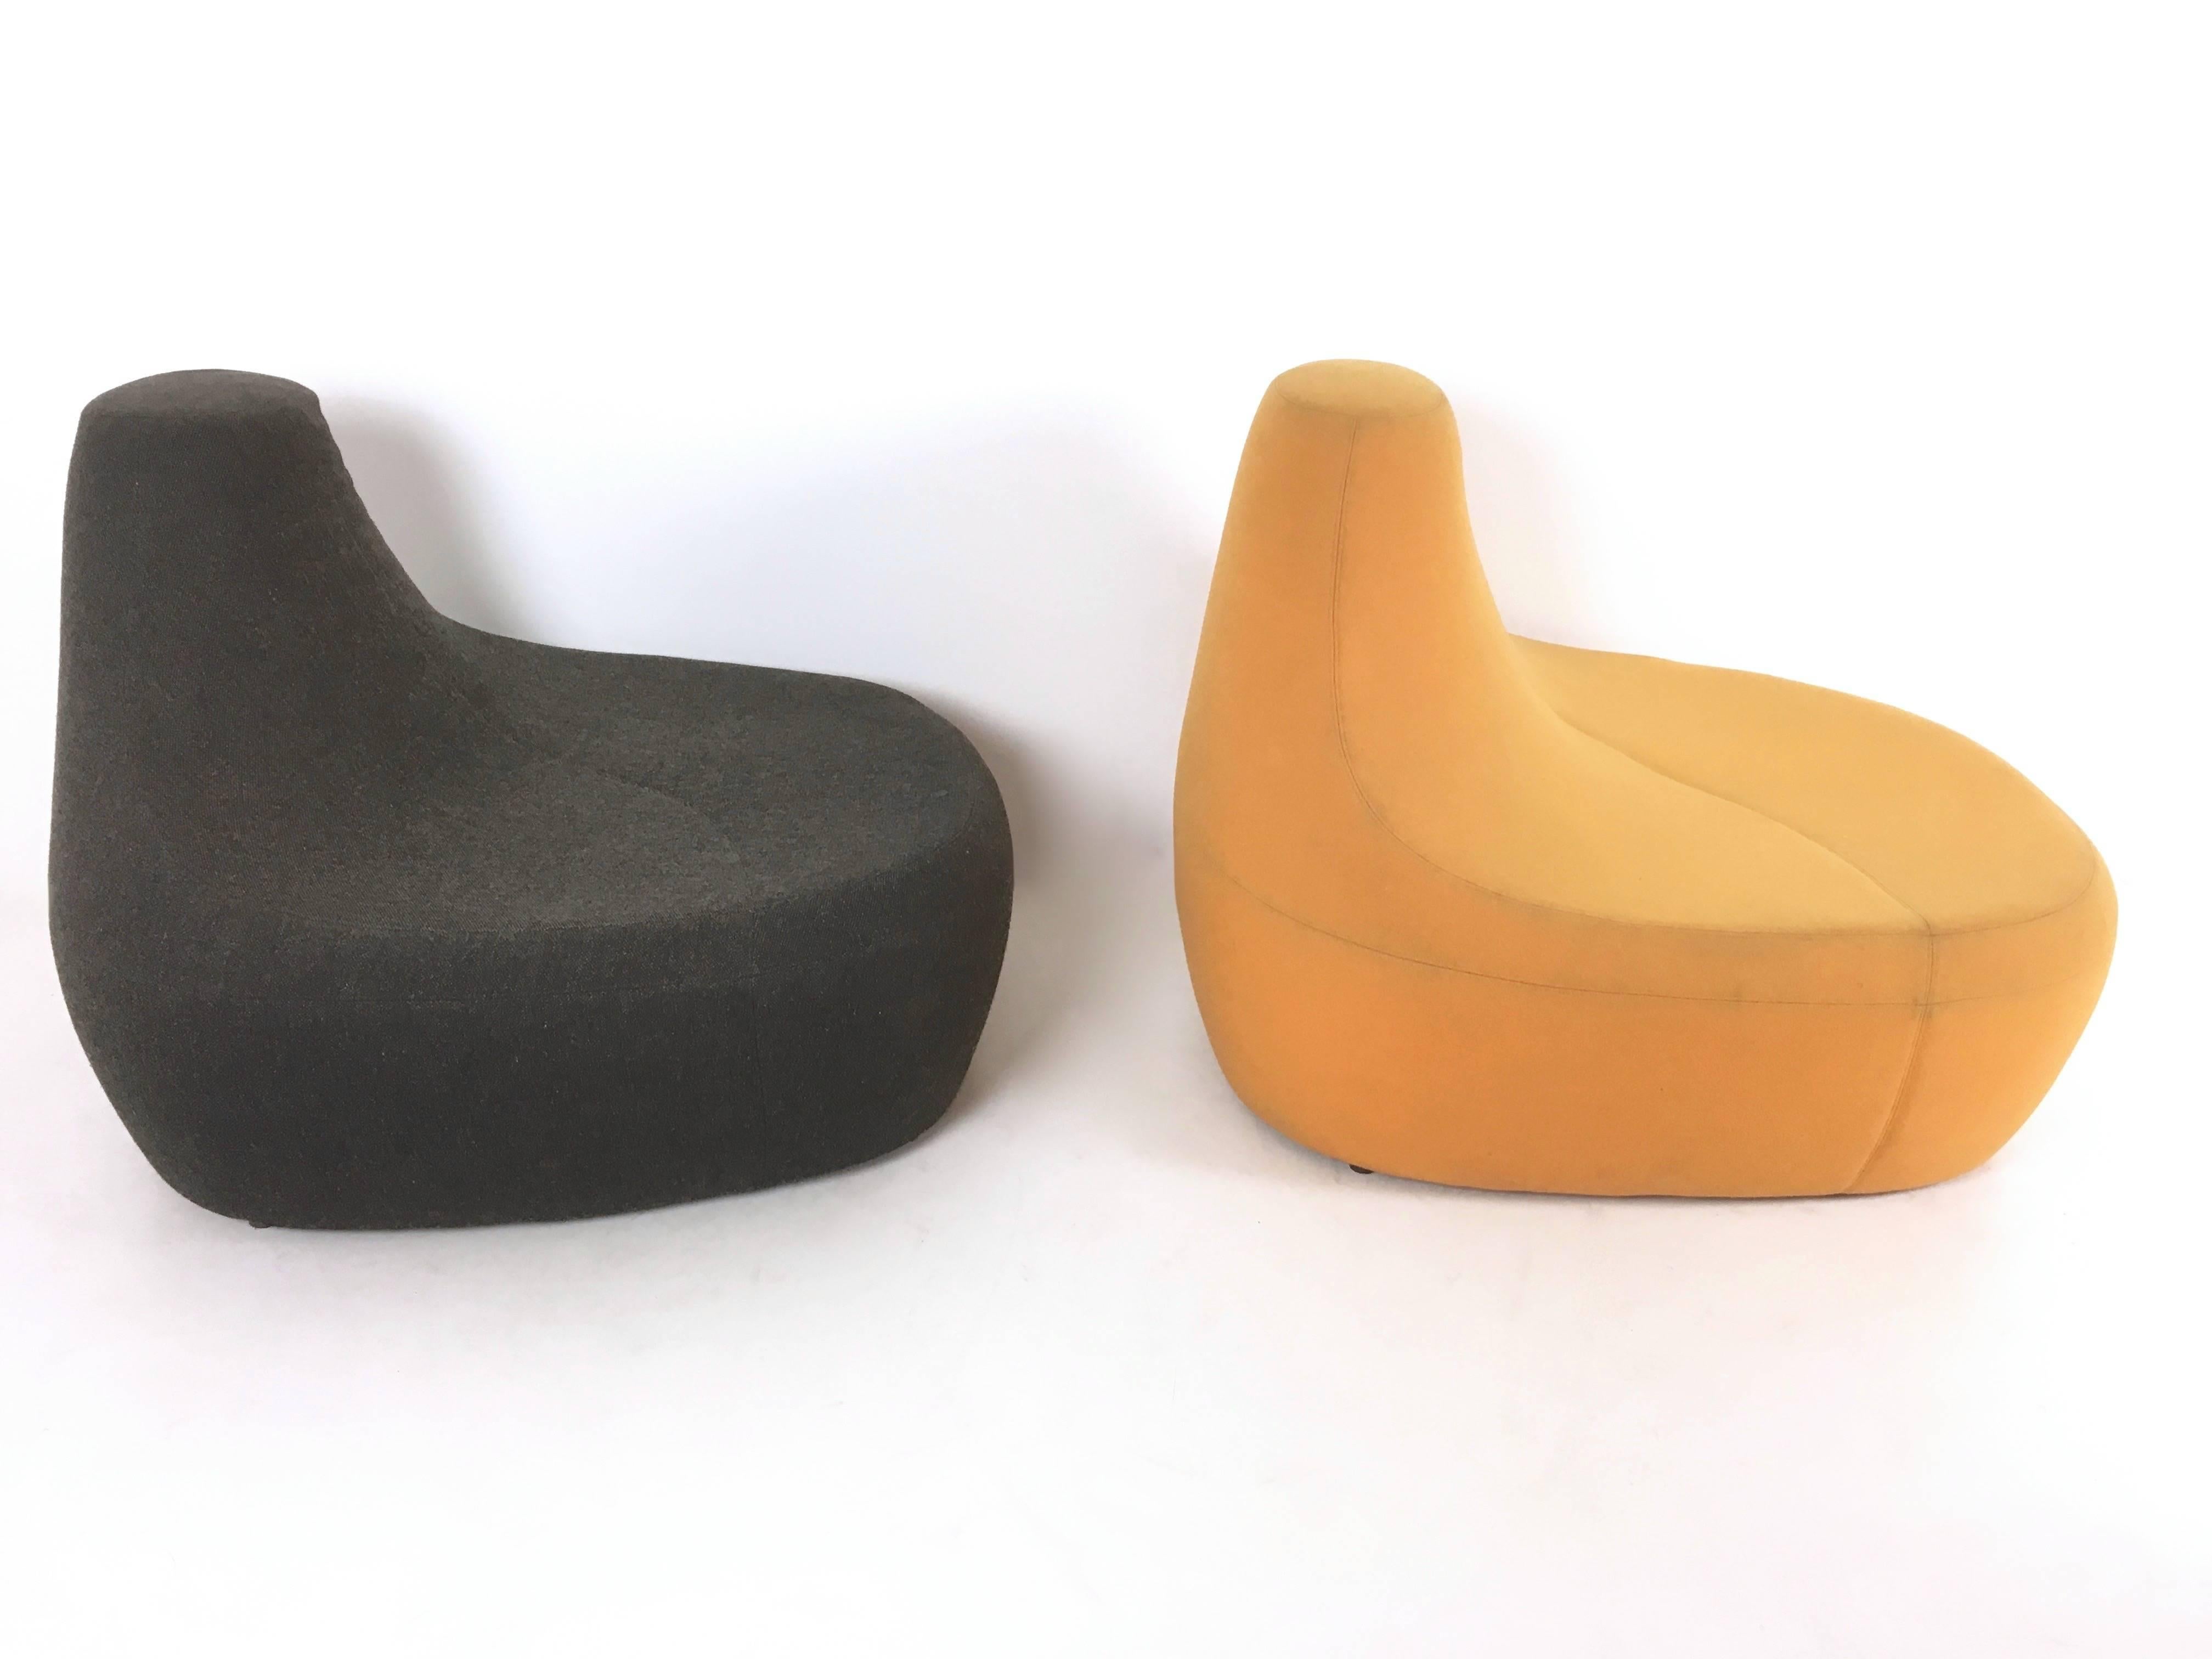 Made in Italy, 1970s. 
They are made in polyurethane and upholstered in black and yellow fabric.
These armchairs are vintage, therefore they might show slight traces of use, but they can be considered as in very good original condition and ready to